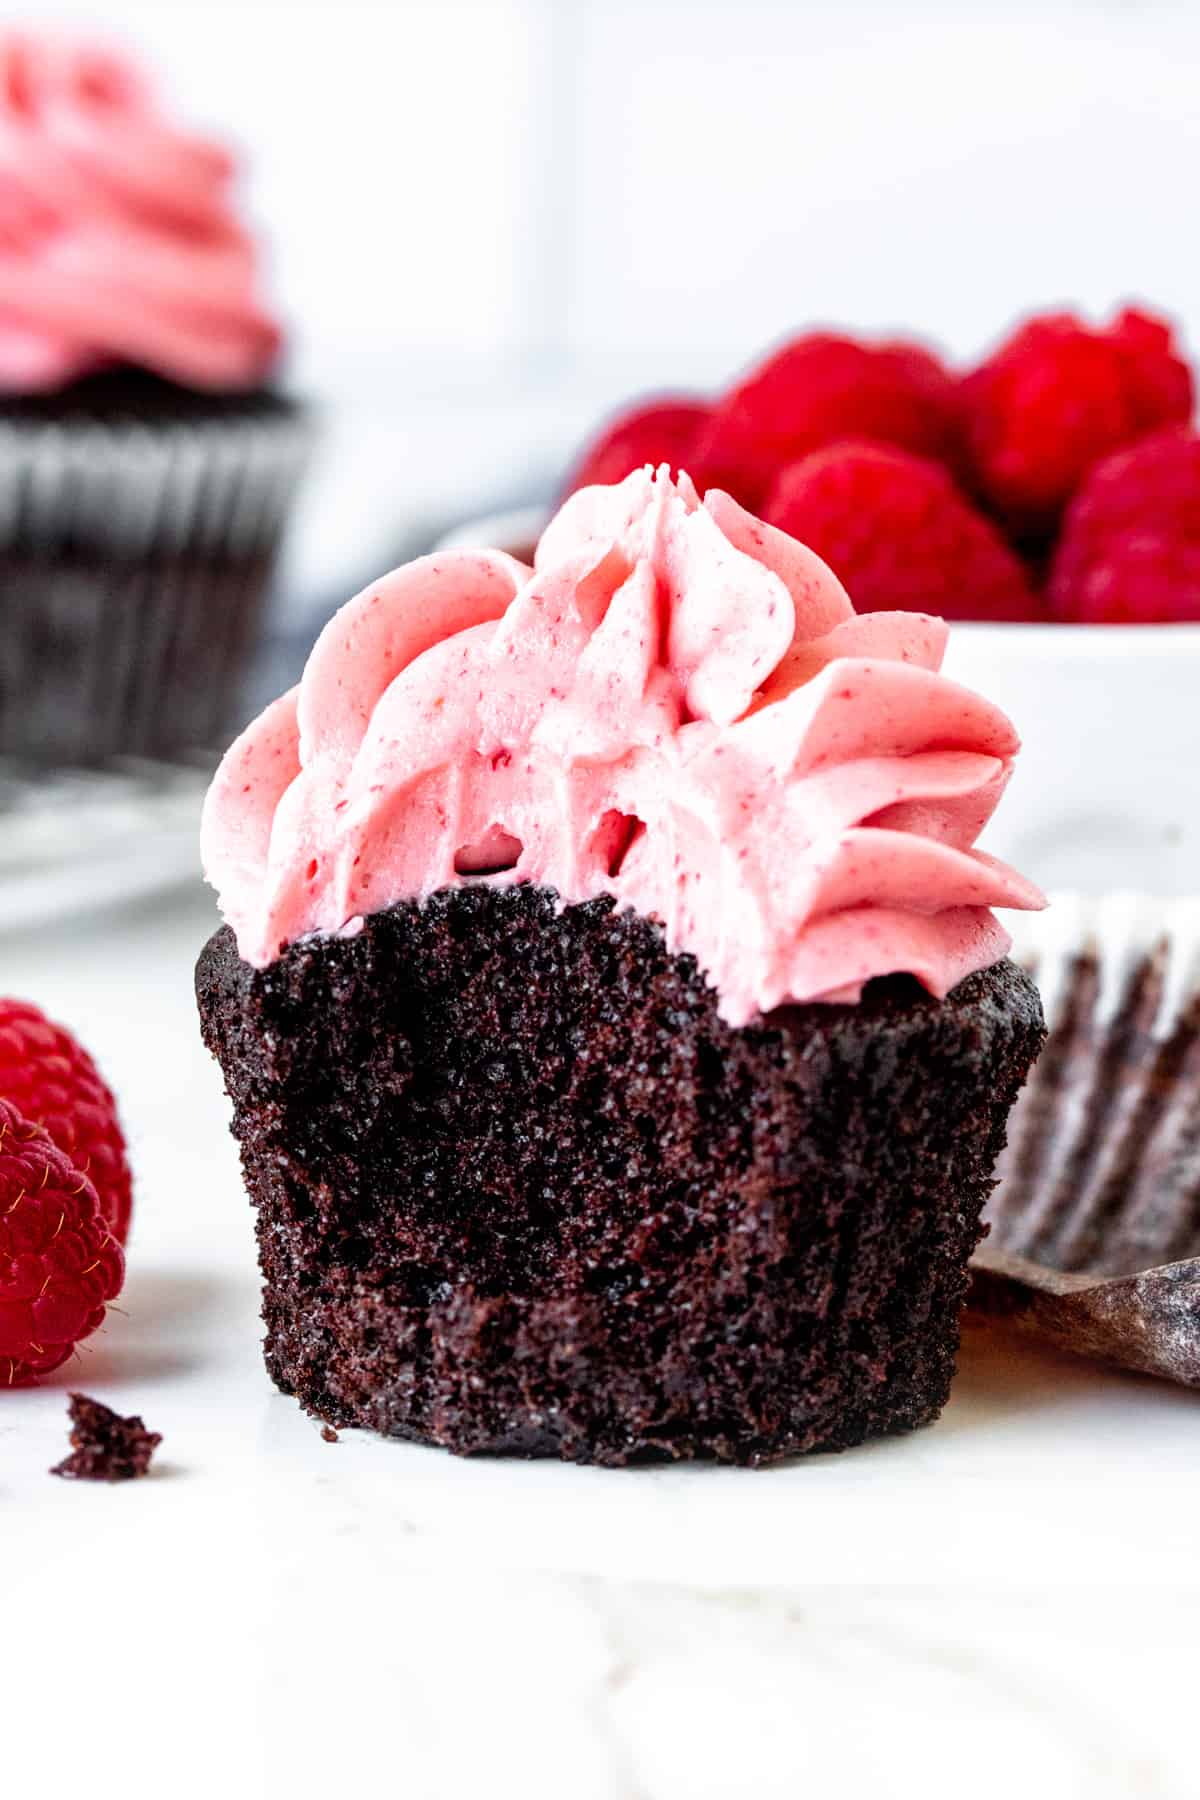 Chocolate raspberry cupcake with a bite taken out